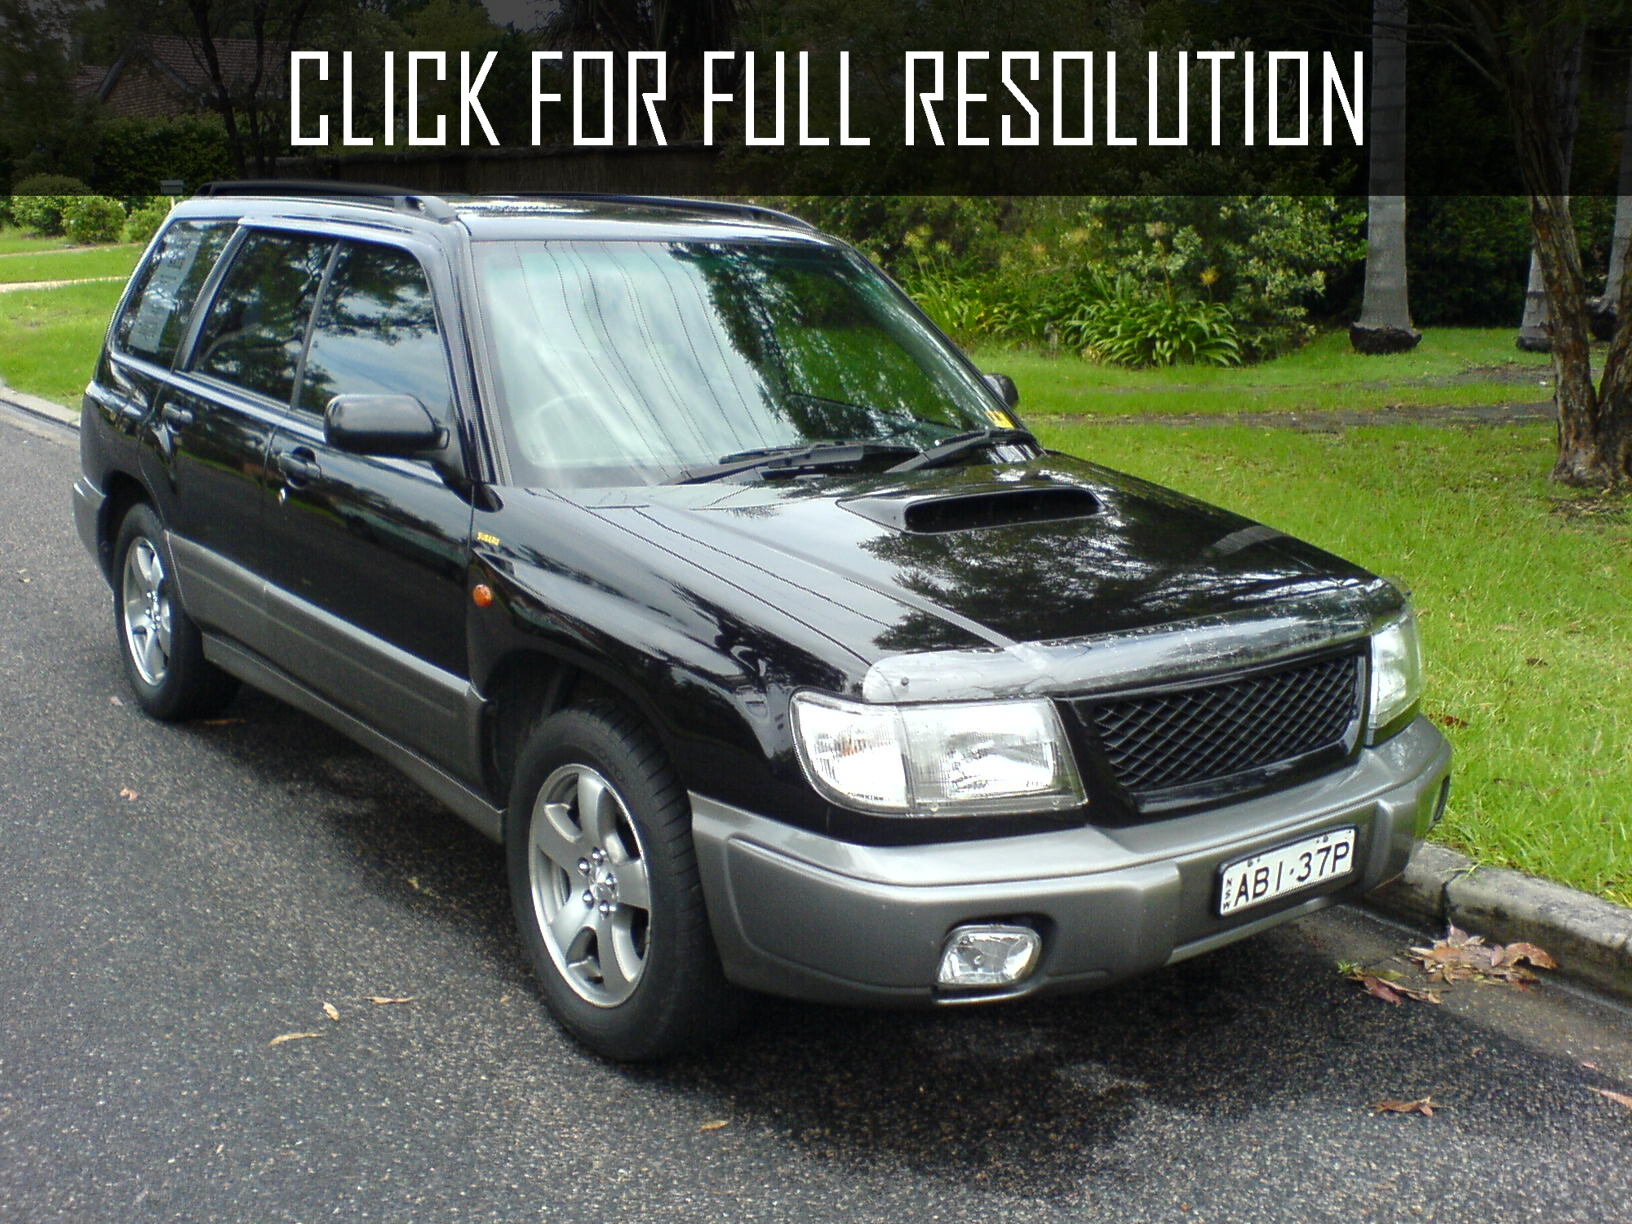 1998 Subaru Forester best image gallery 8/17 share and